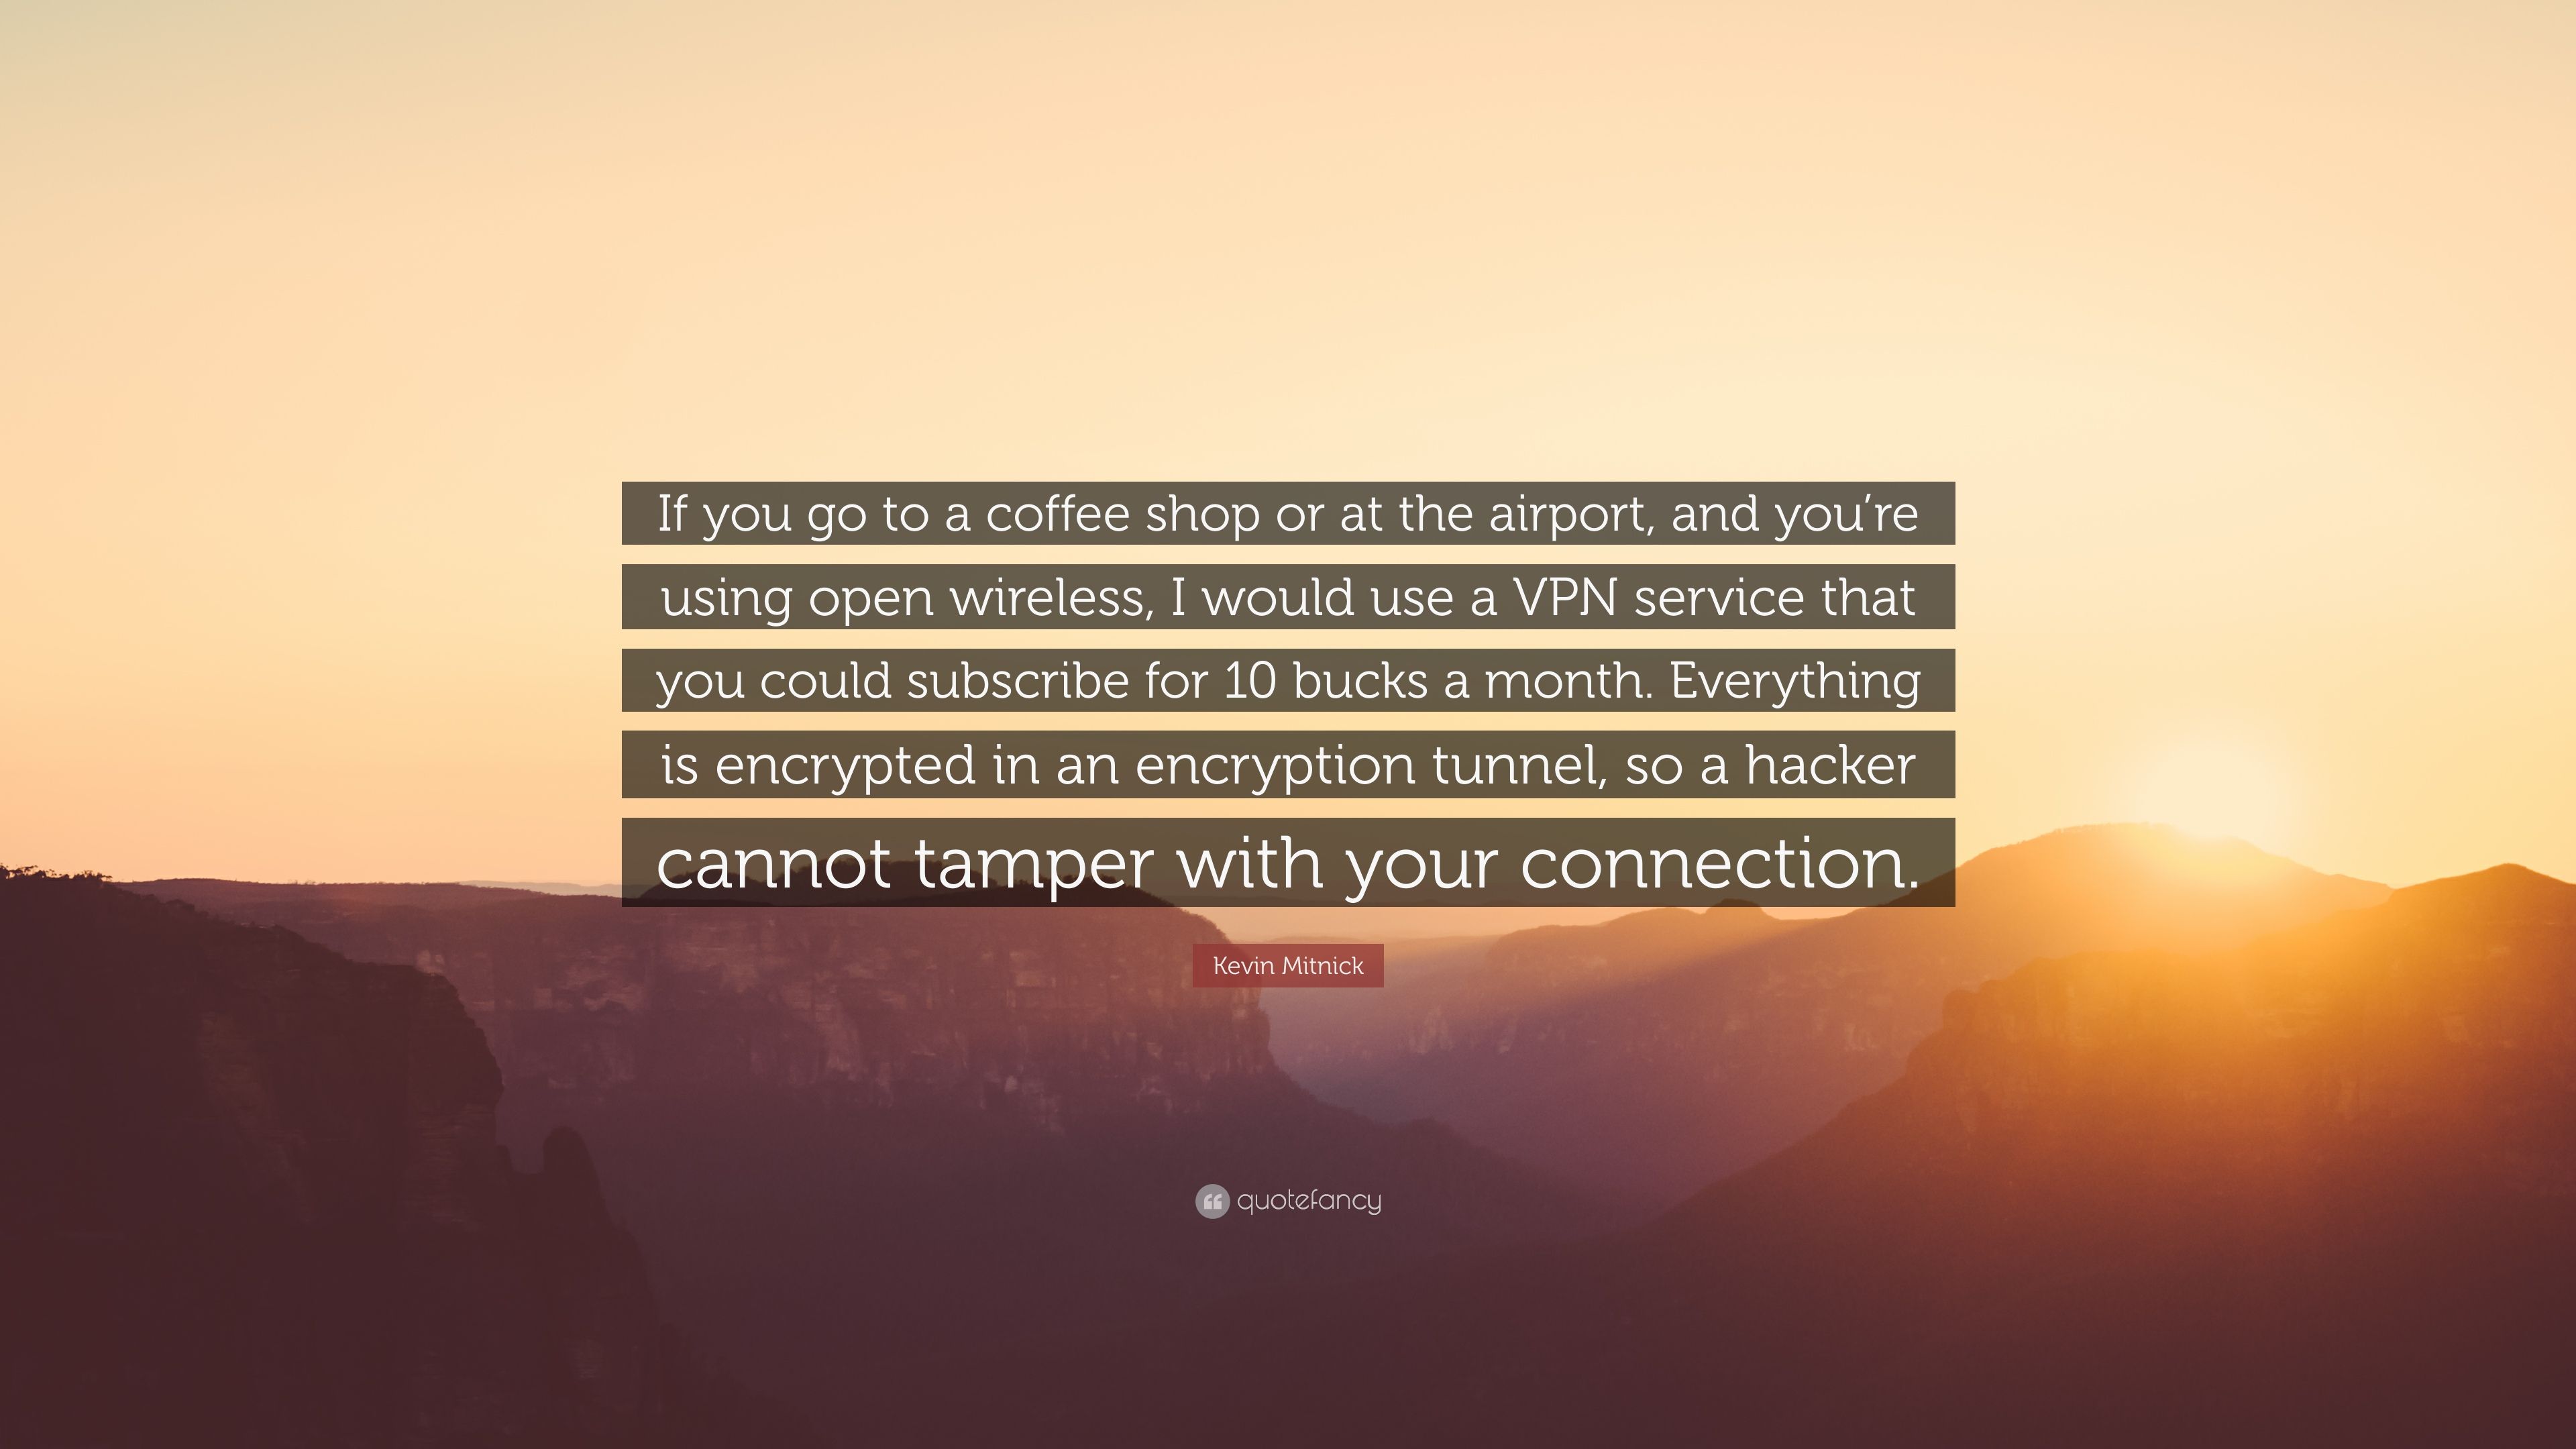 Kevin Mitnick Quote: “If you go to a coffee shop or at the airport